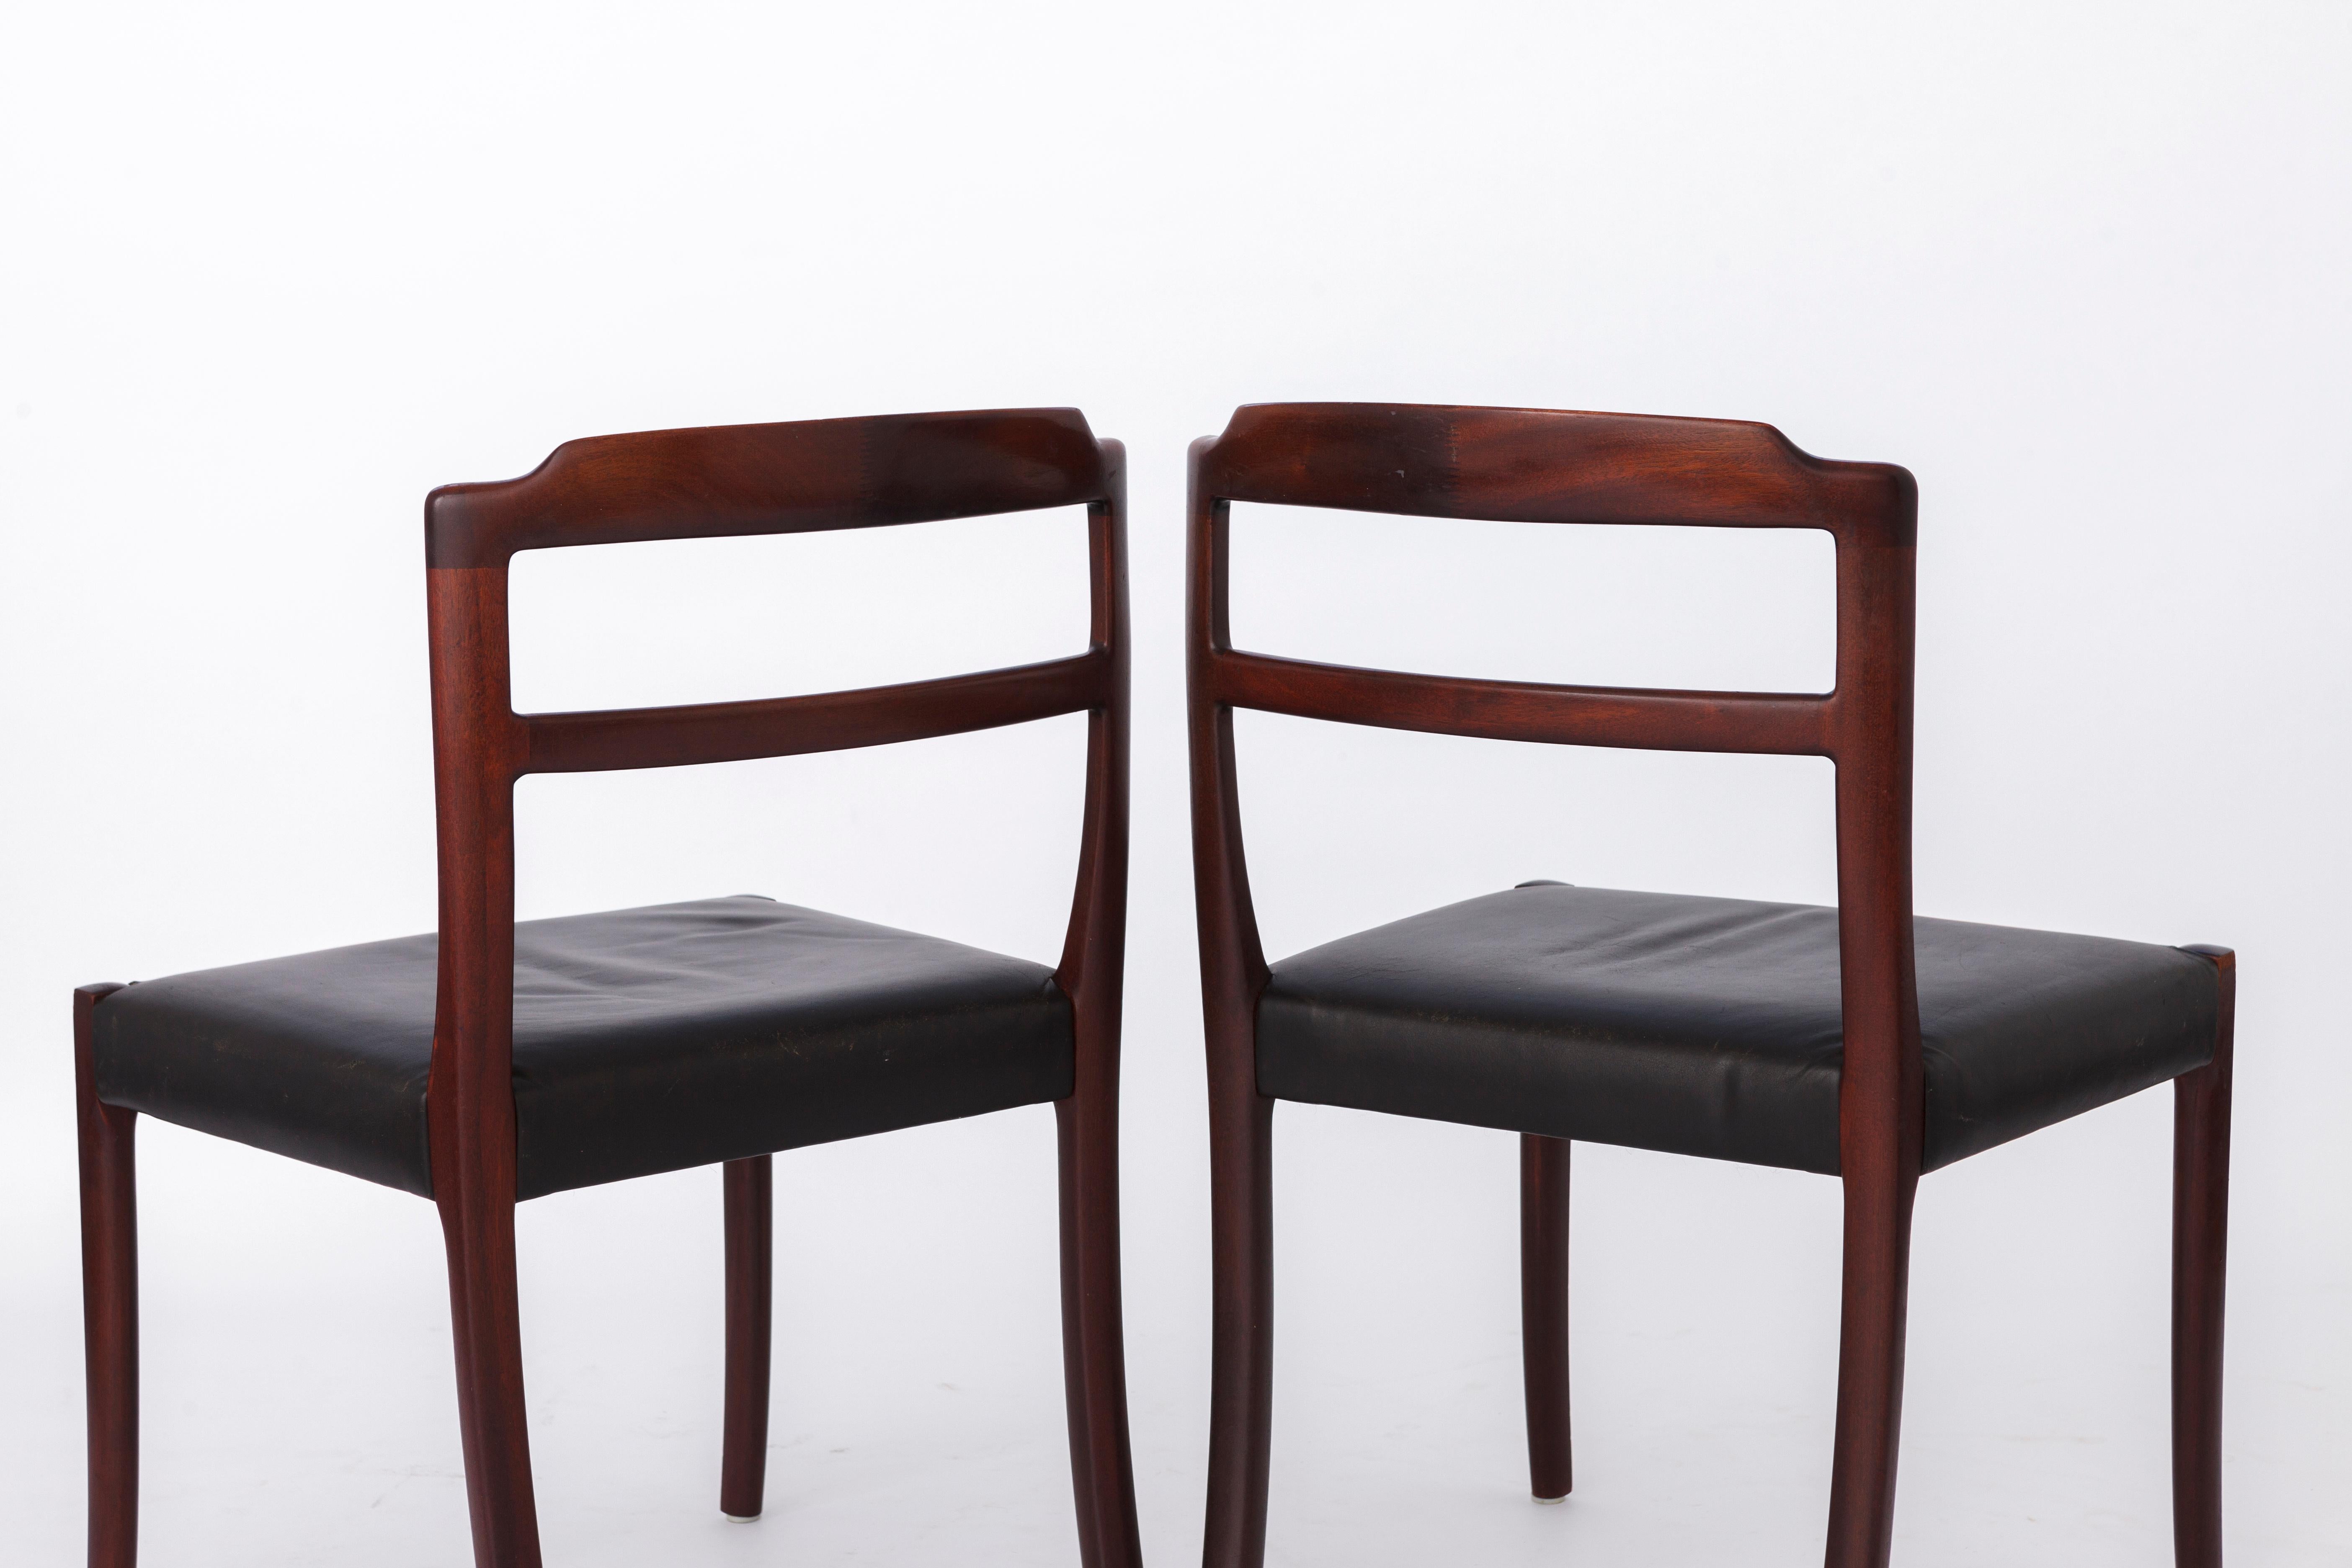 4 Vintage Chairs by Ole Wanscher, 1960s, Rosewood & Leather, Denmark For Sale 1